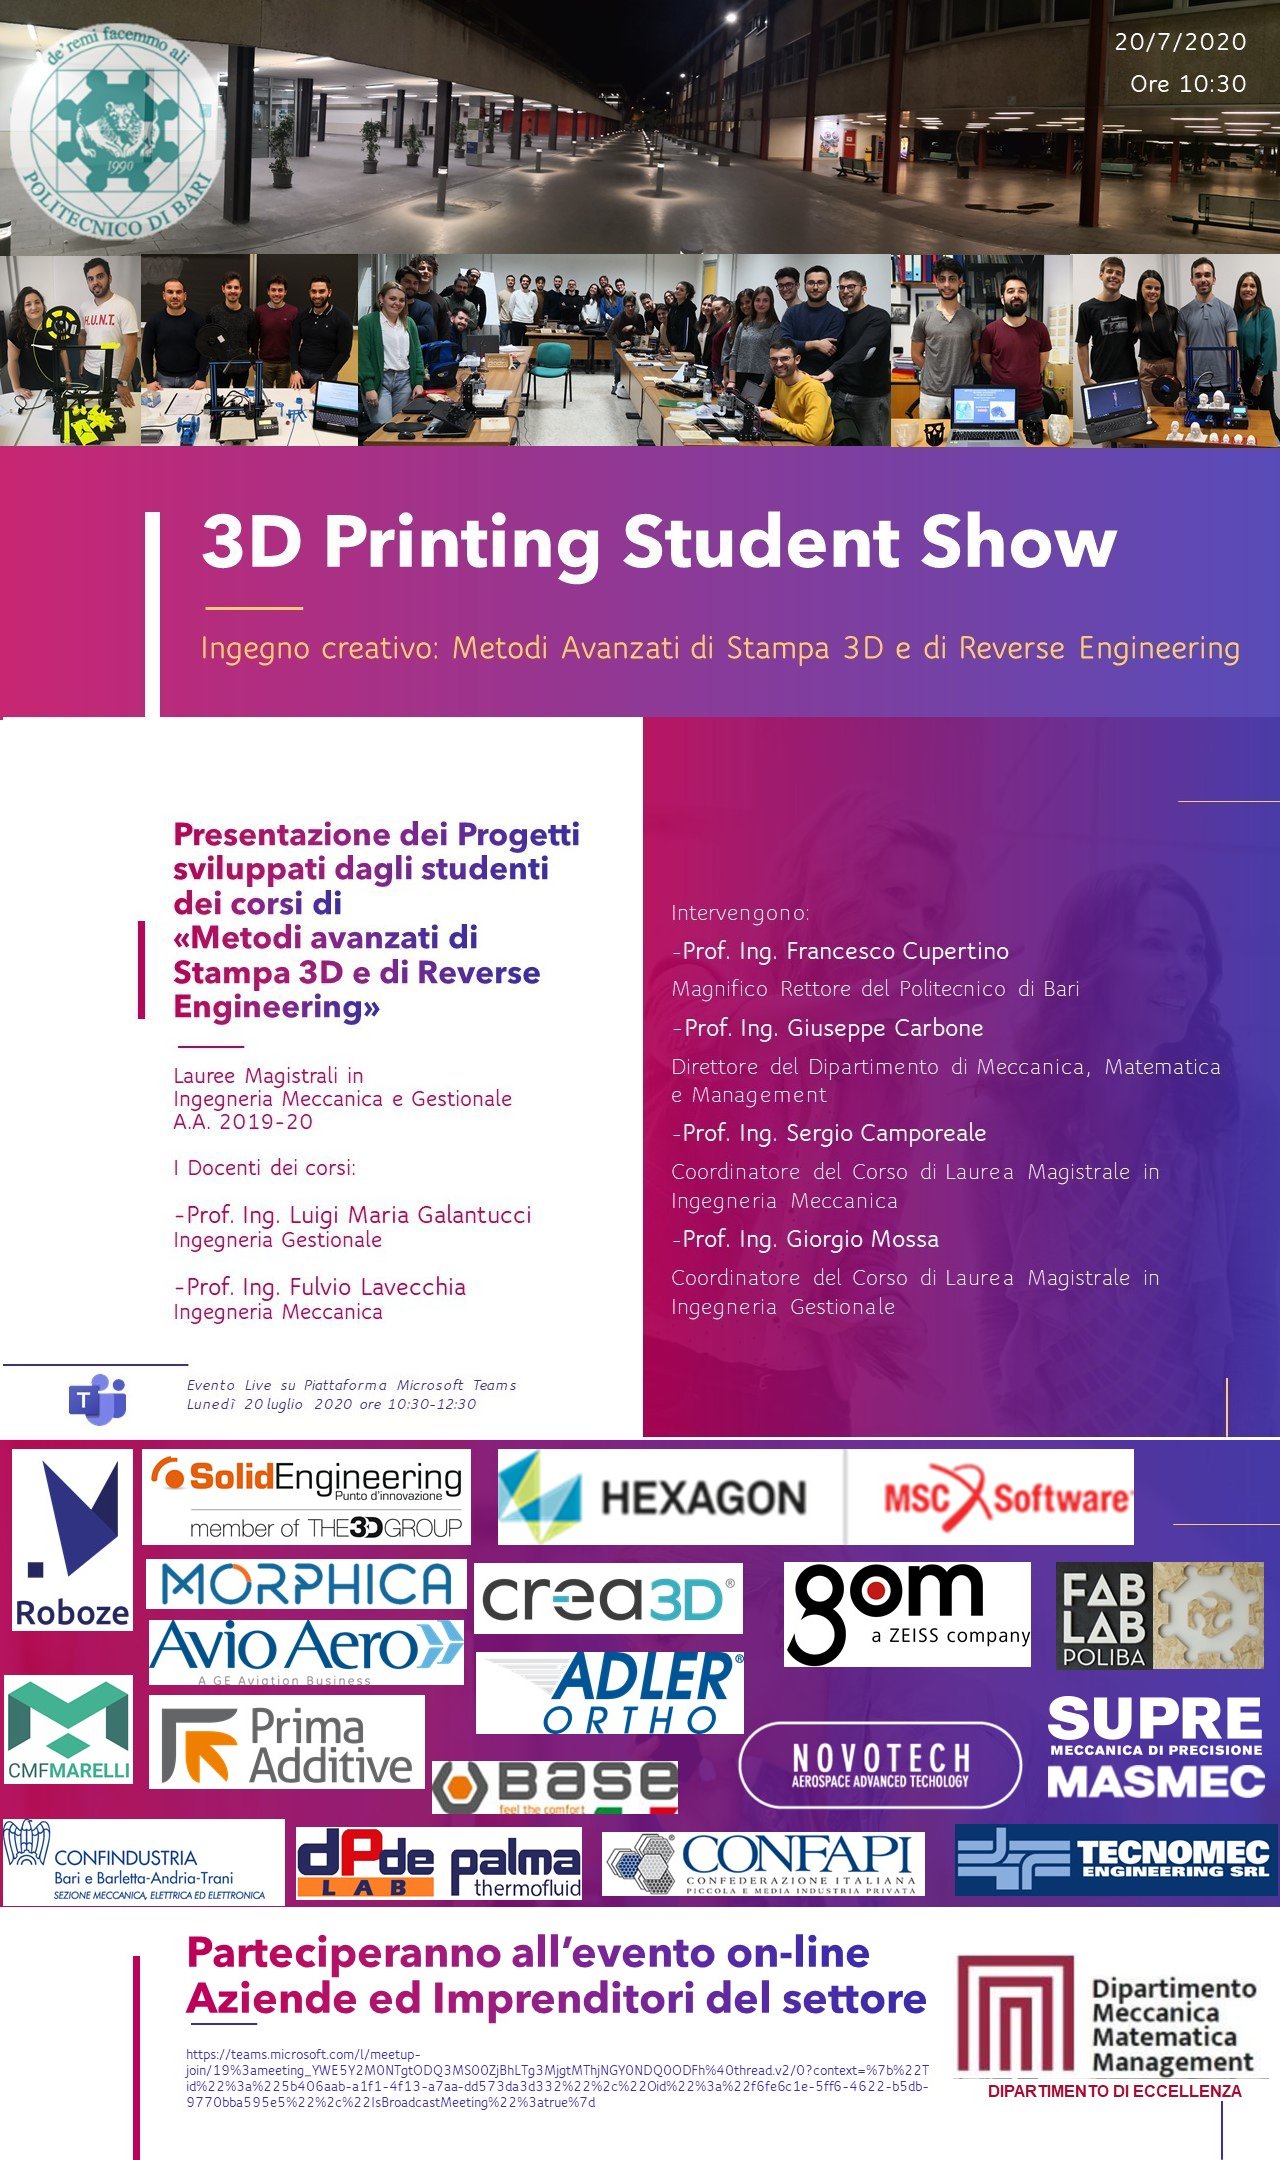 3d printing student show